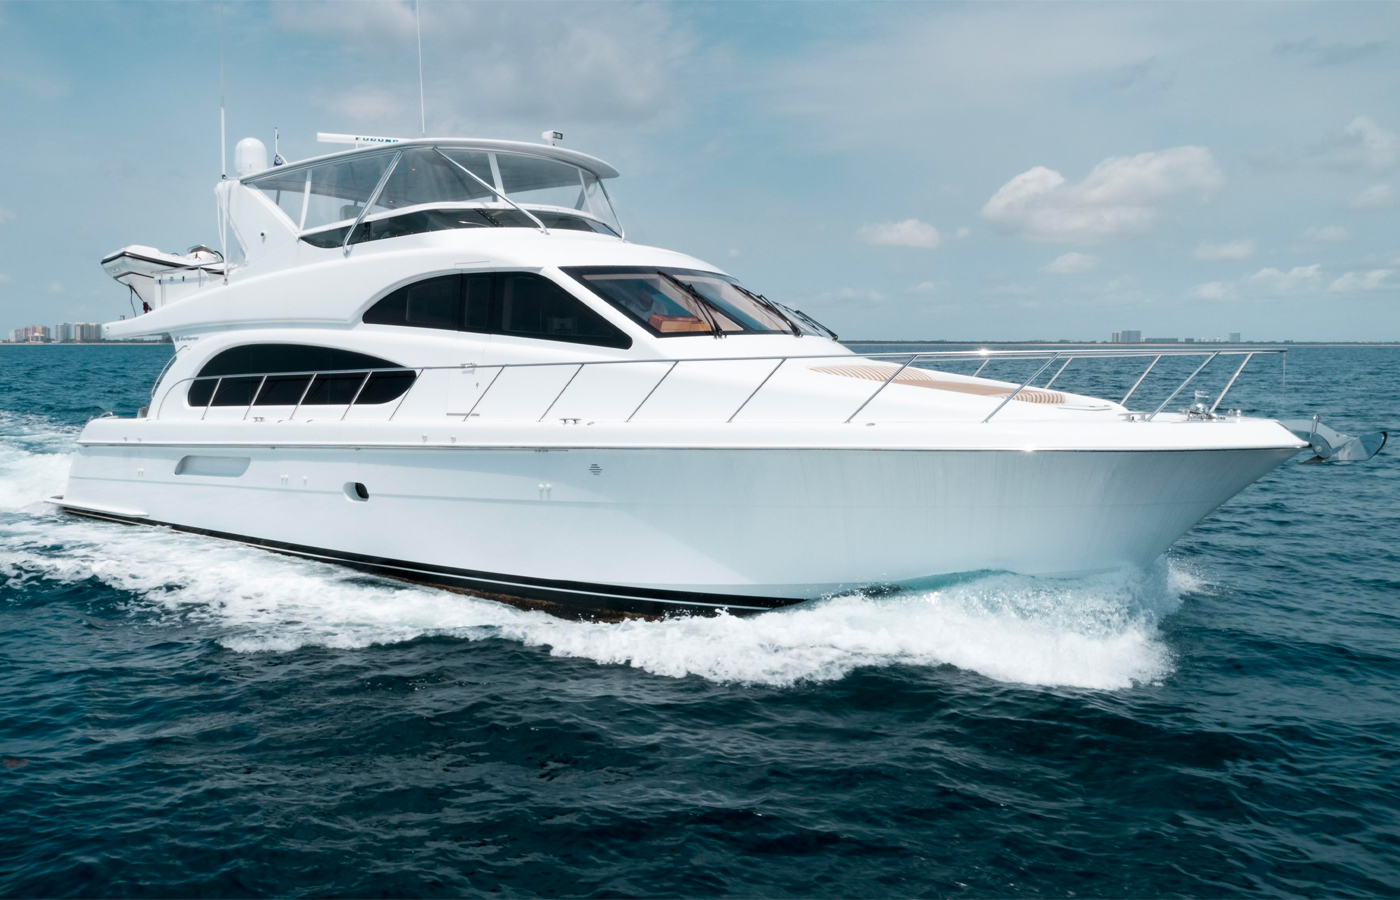 64 Hatteras MARILYN JANE Sold By Denison Yacht Brokers